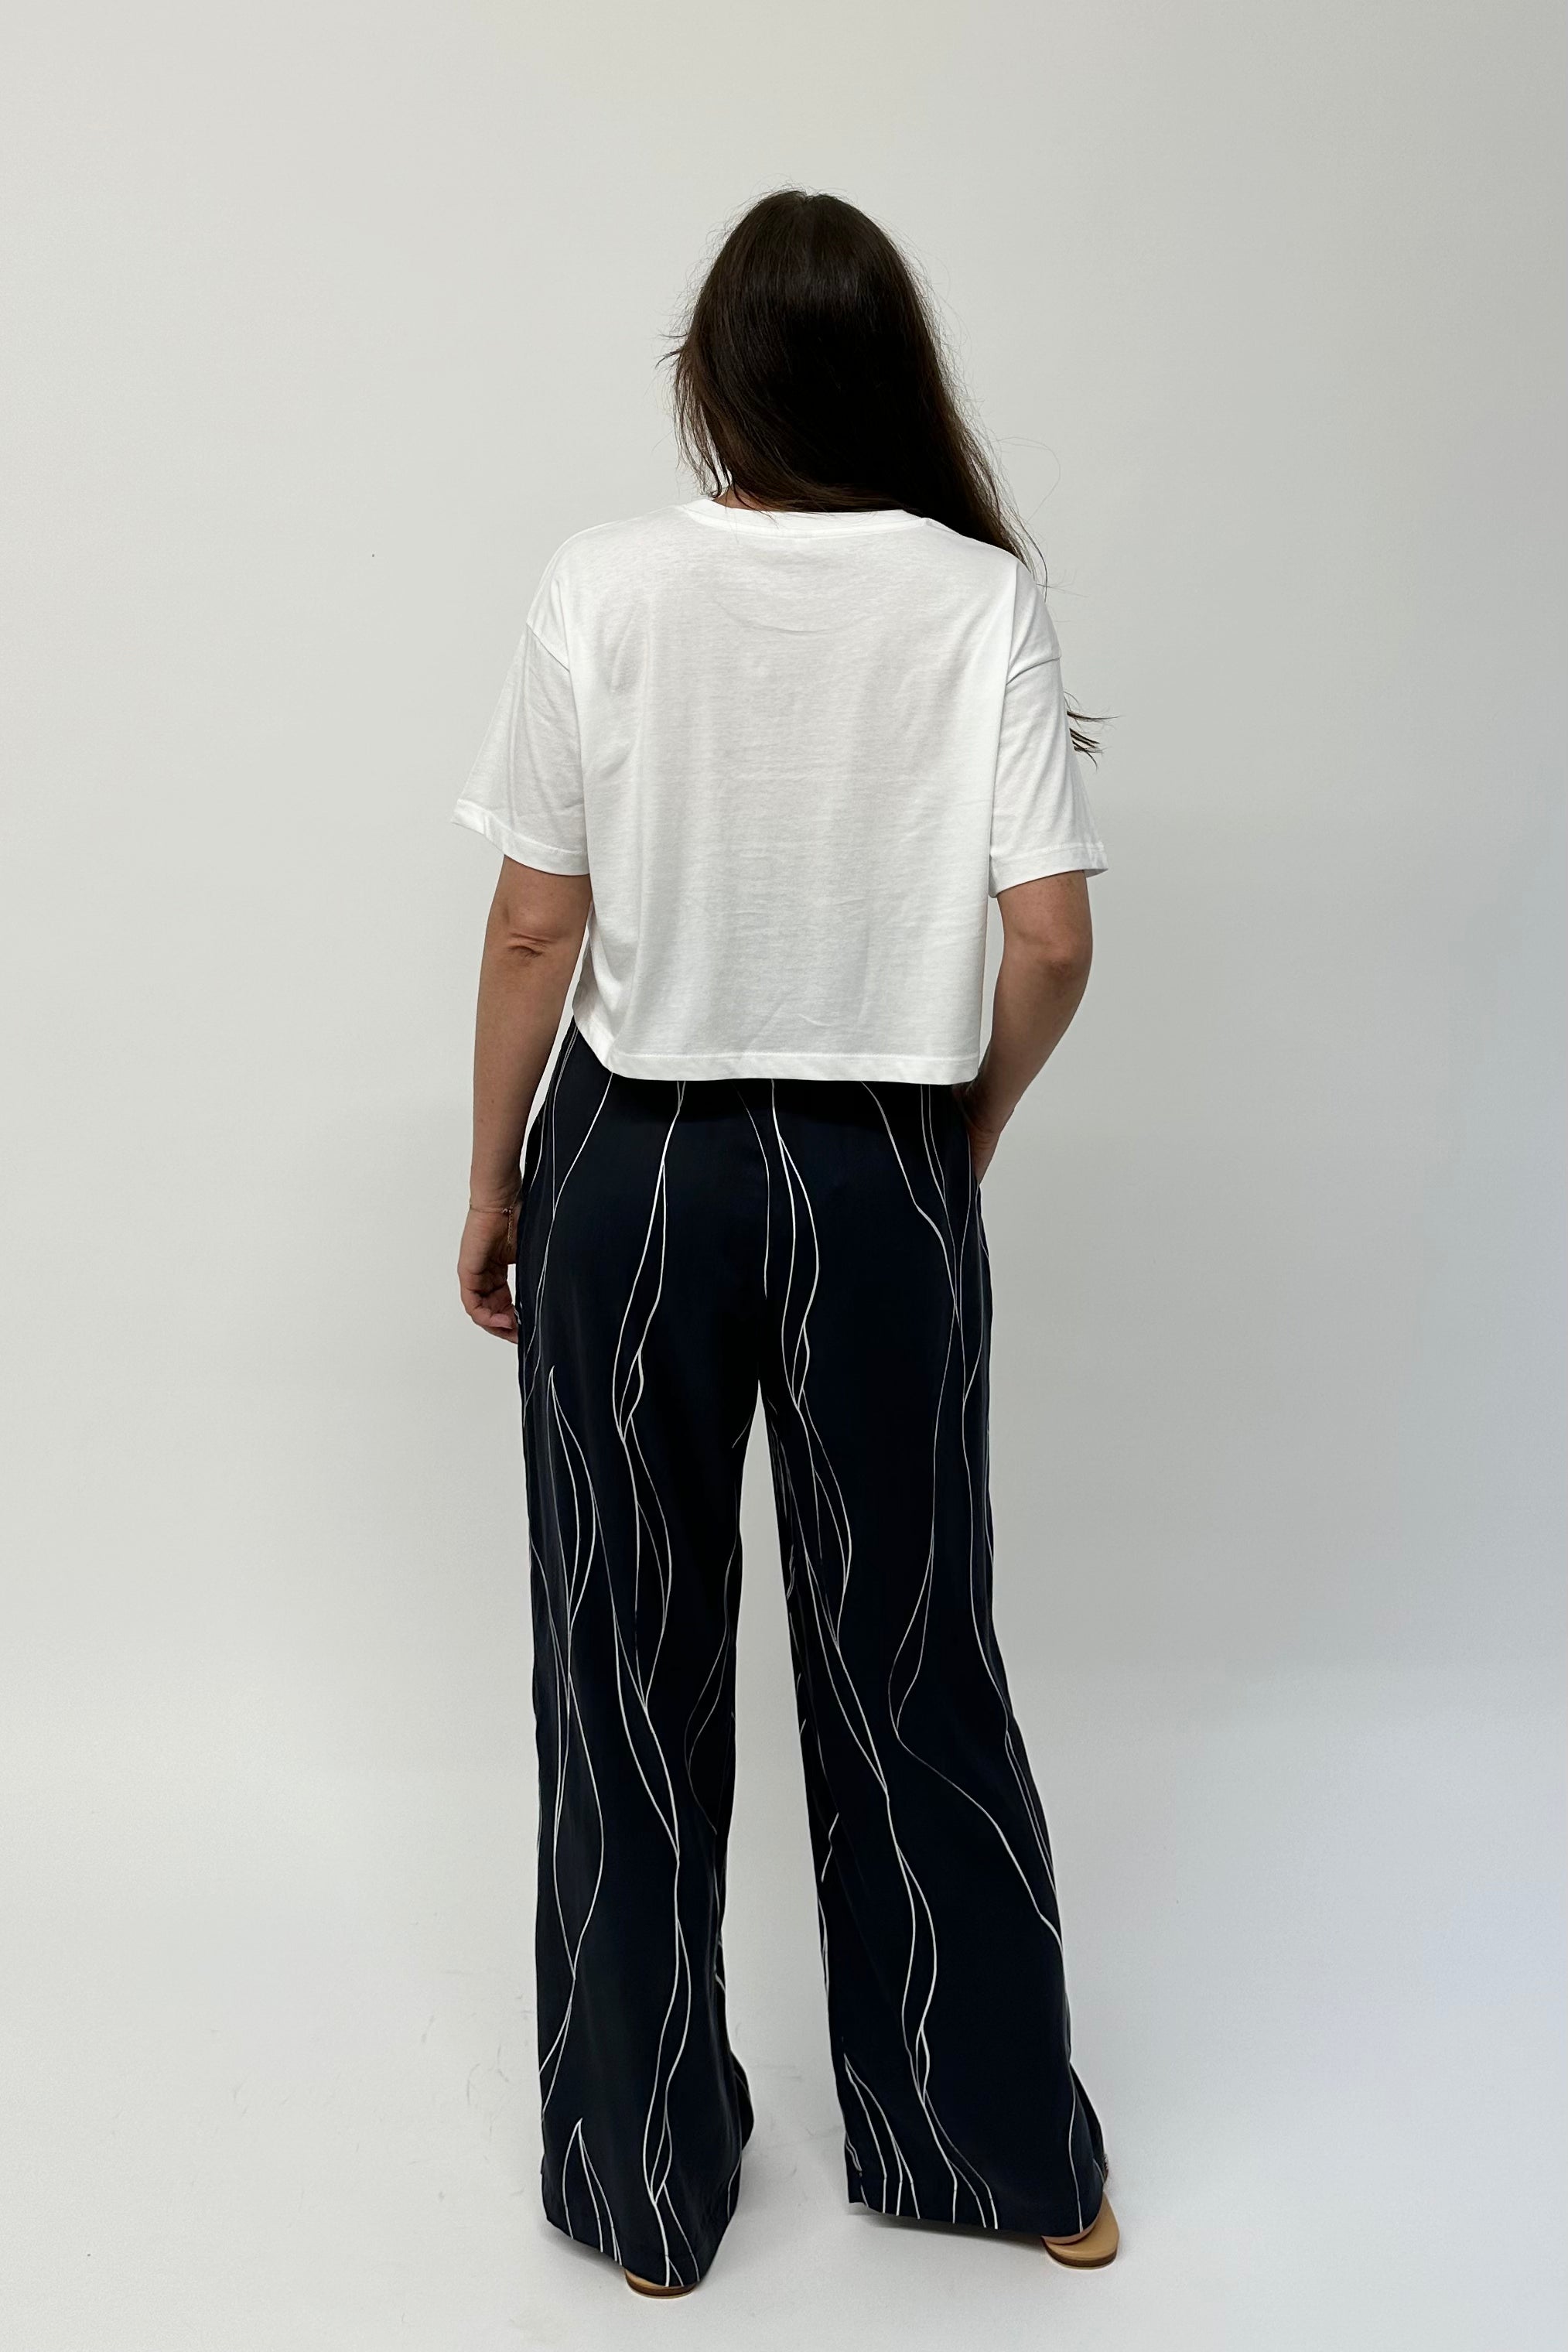 Wide legged silk pants with pockets.